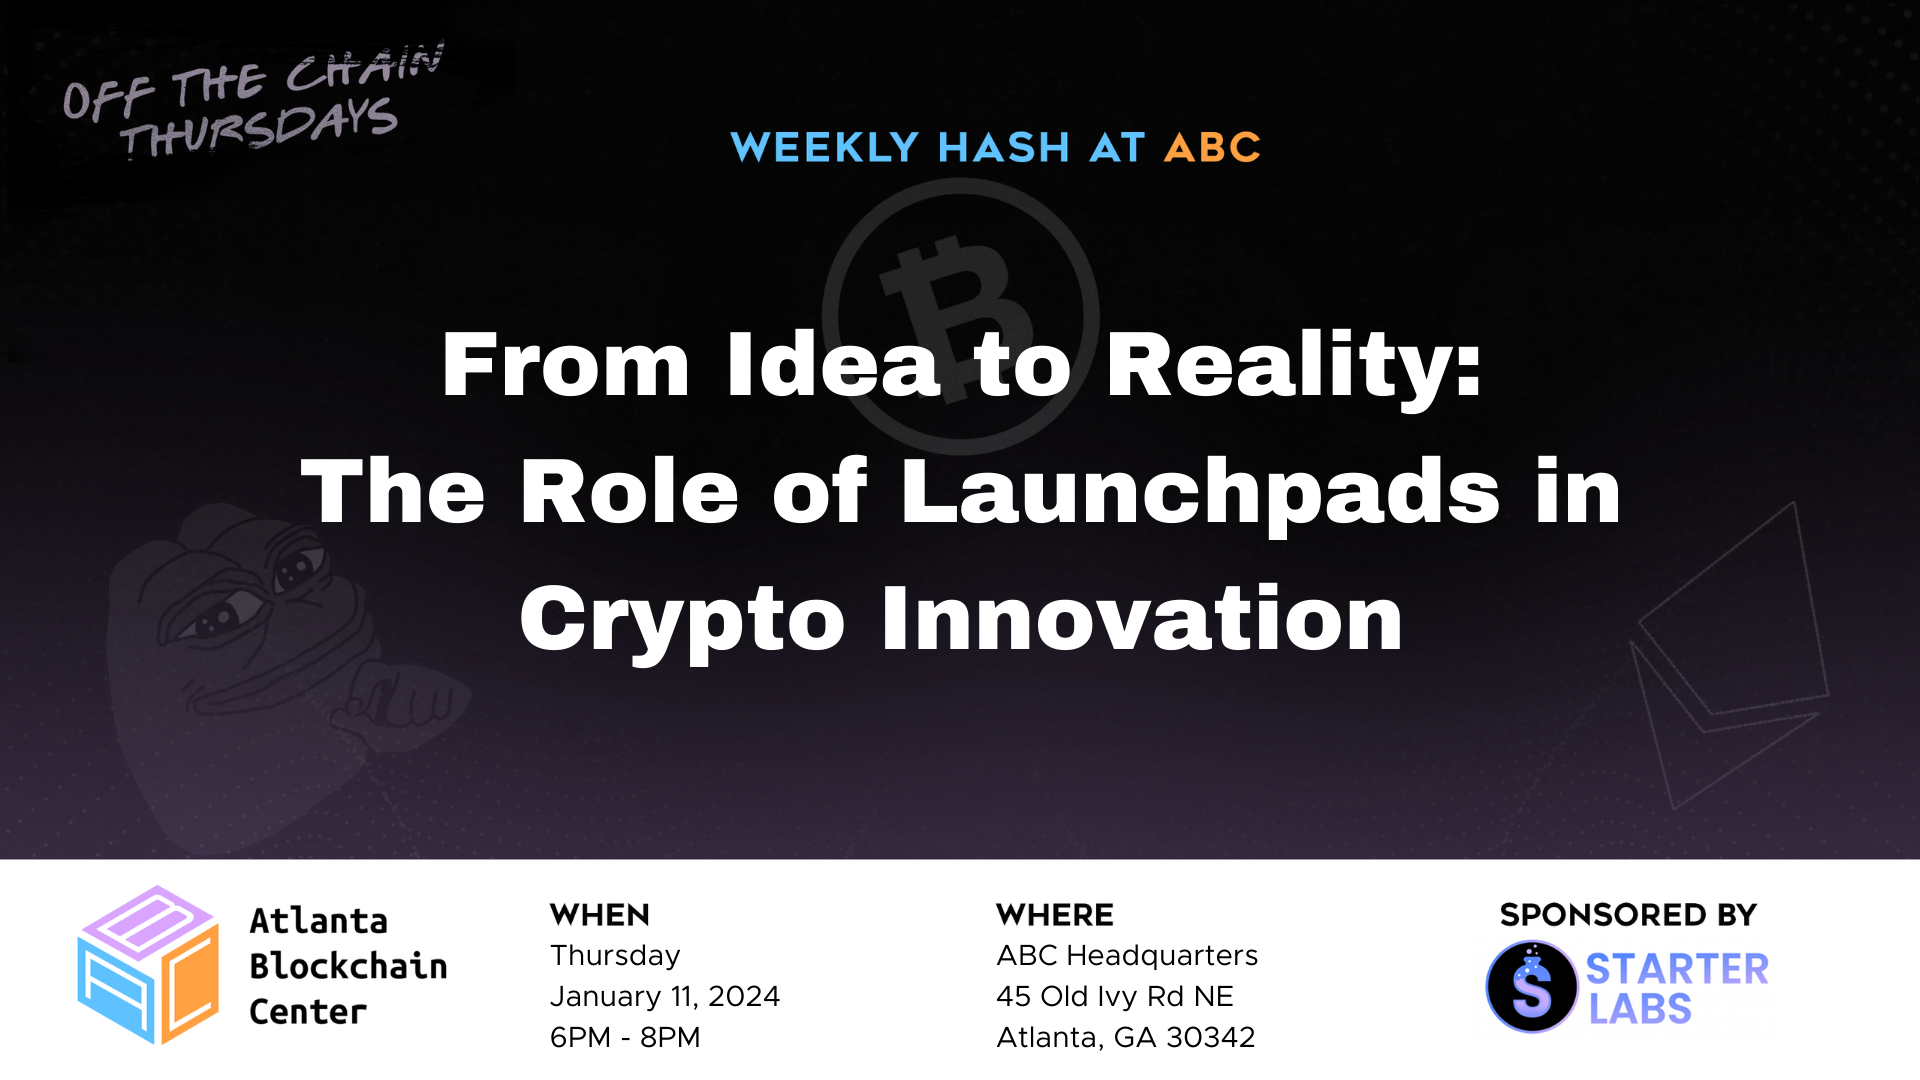 Weekly Hash at ABC – From Idea to Reality: The Role of Launchpads in Crypto Innovation